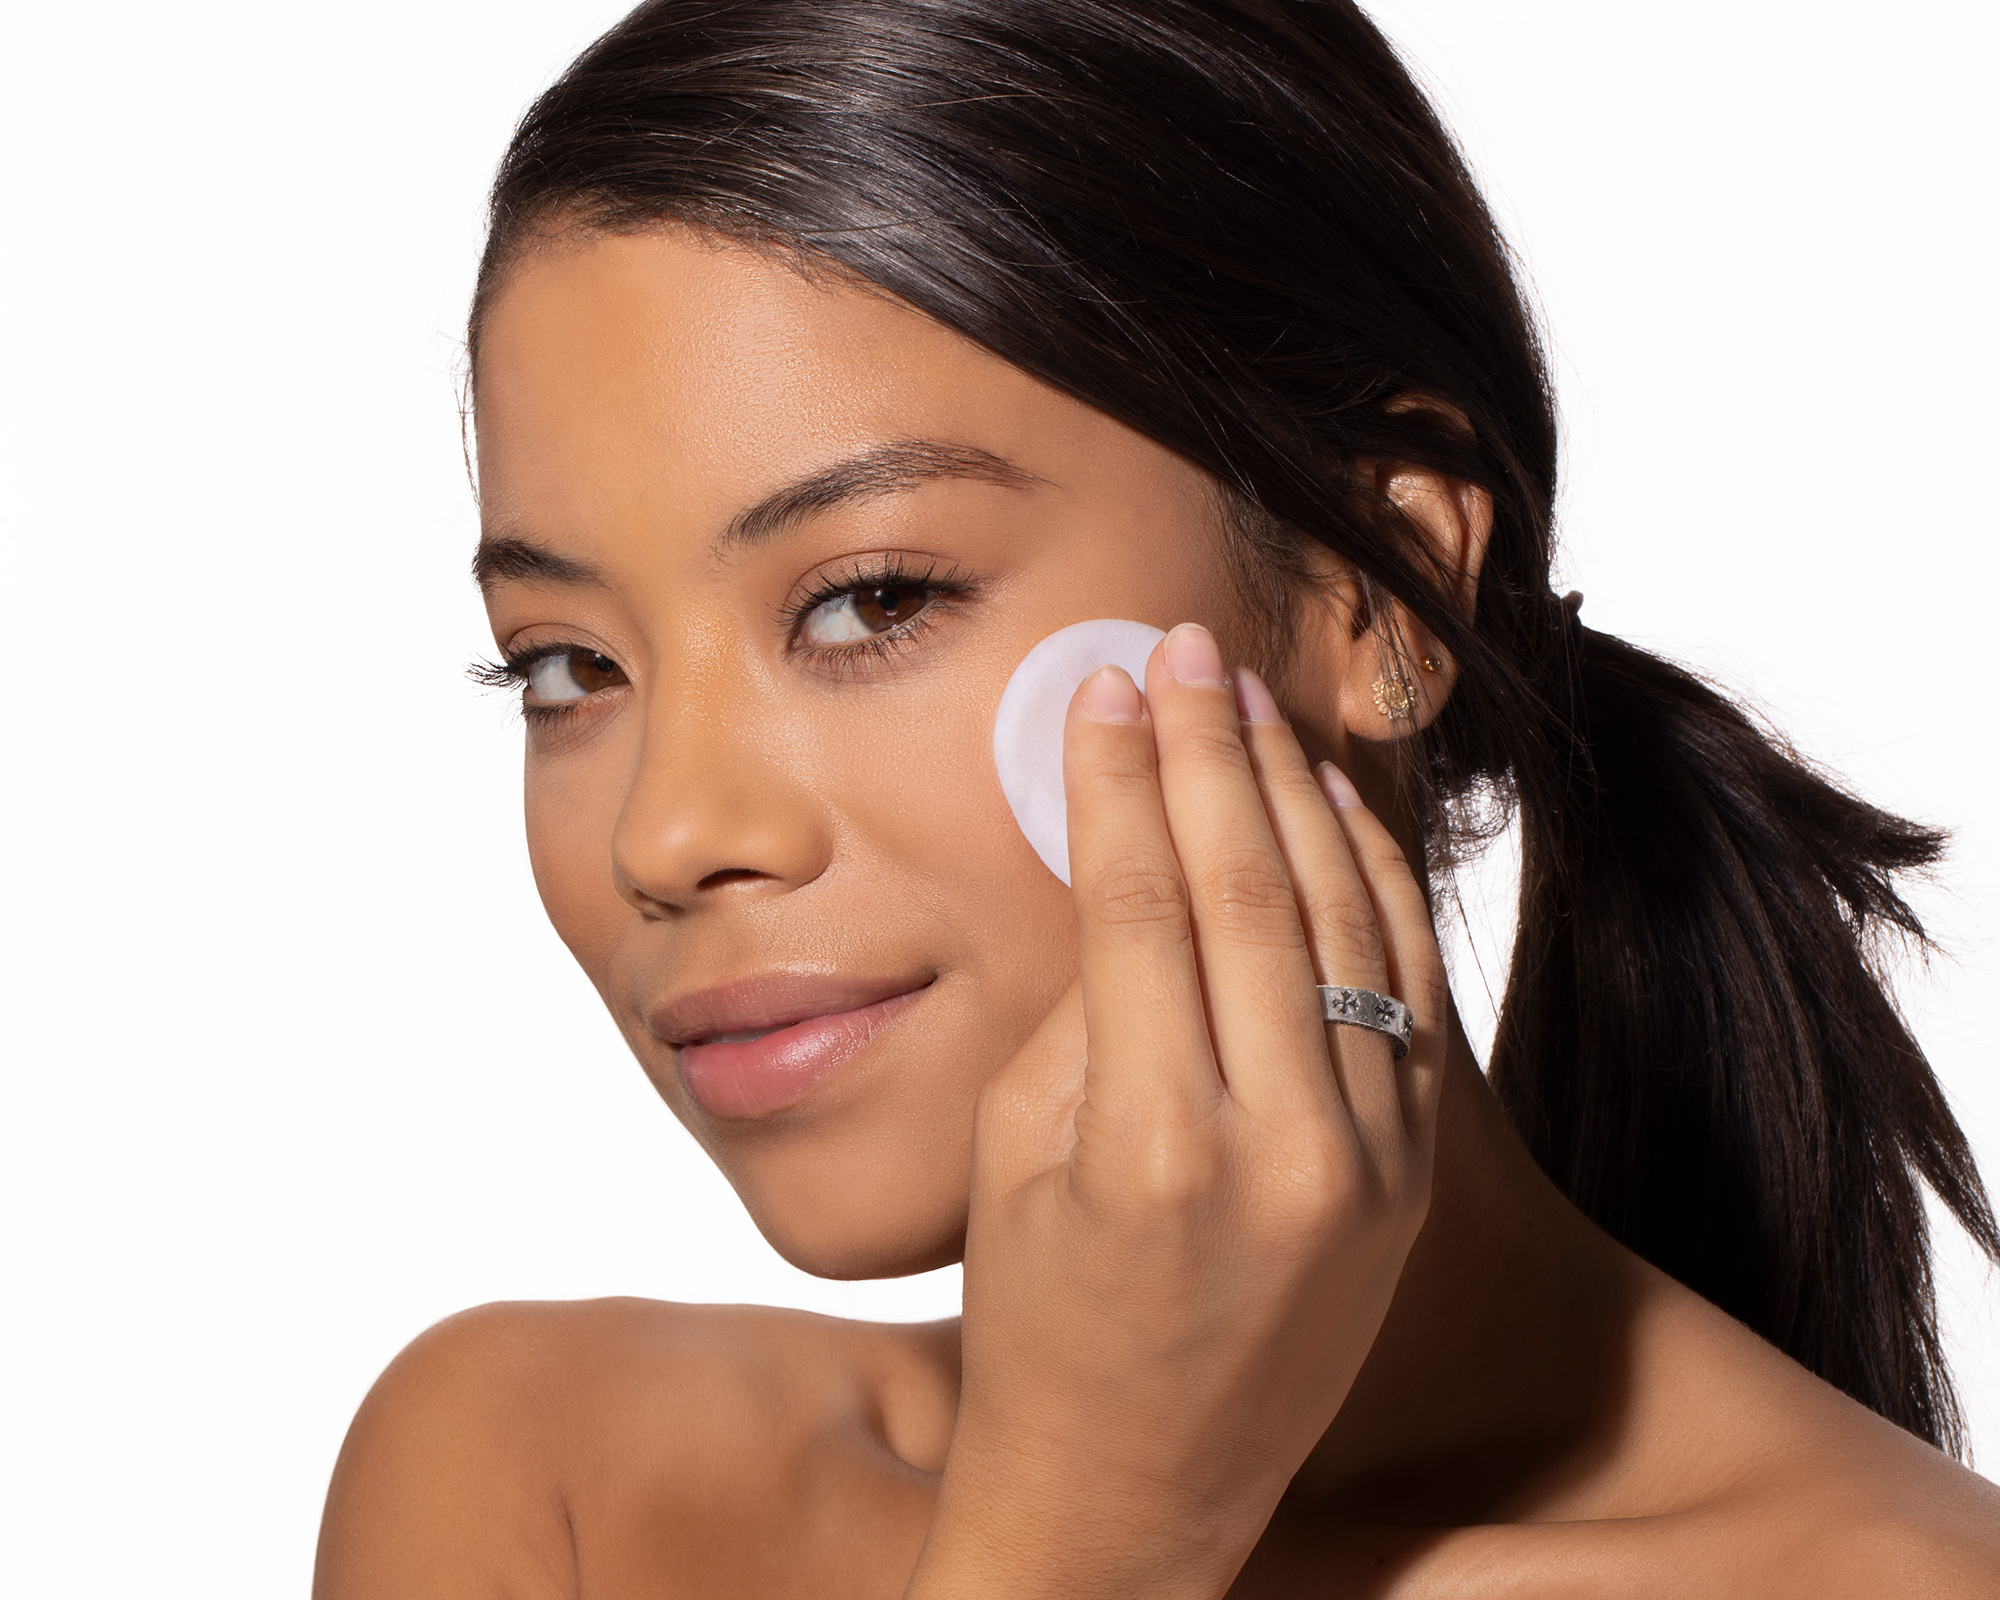 Seven Tips to Prevent “Maskne” and Skin Irritation From Face Coverings